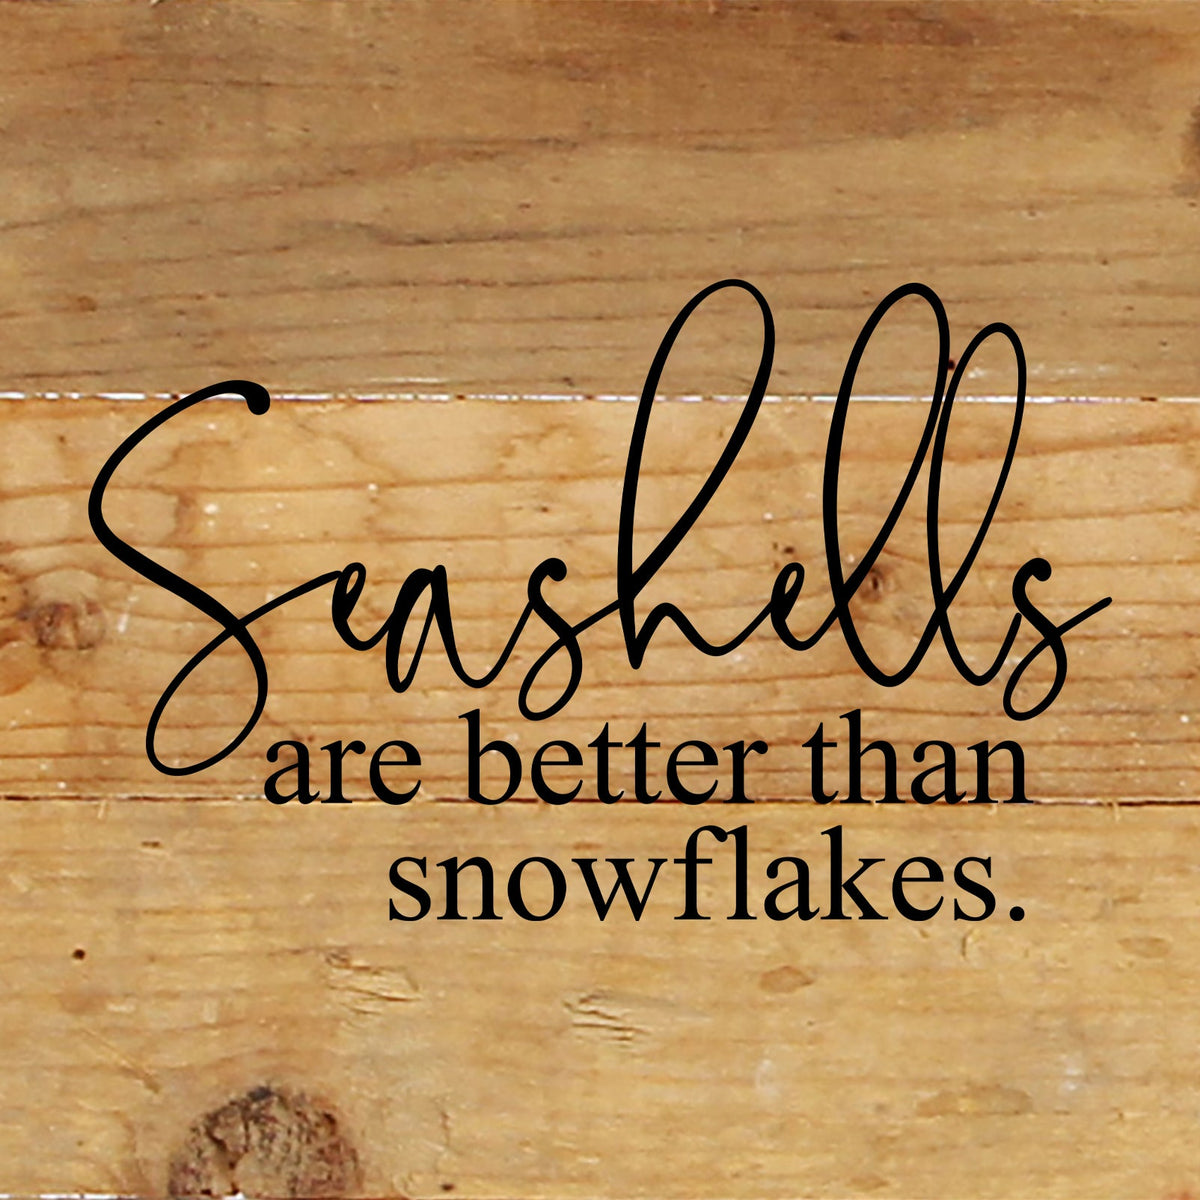 Seashells are better than snowflakes / 6"x6" Reclaimed Wood Sign